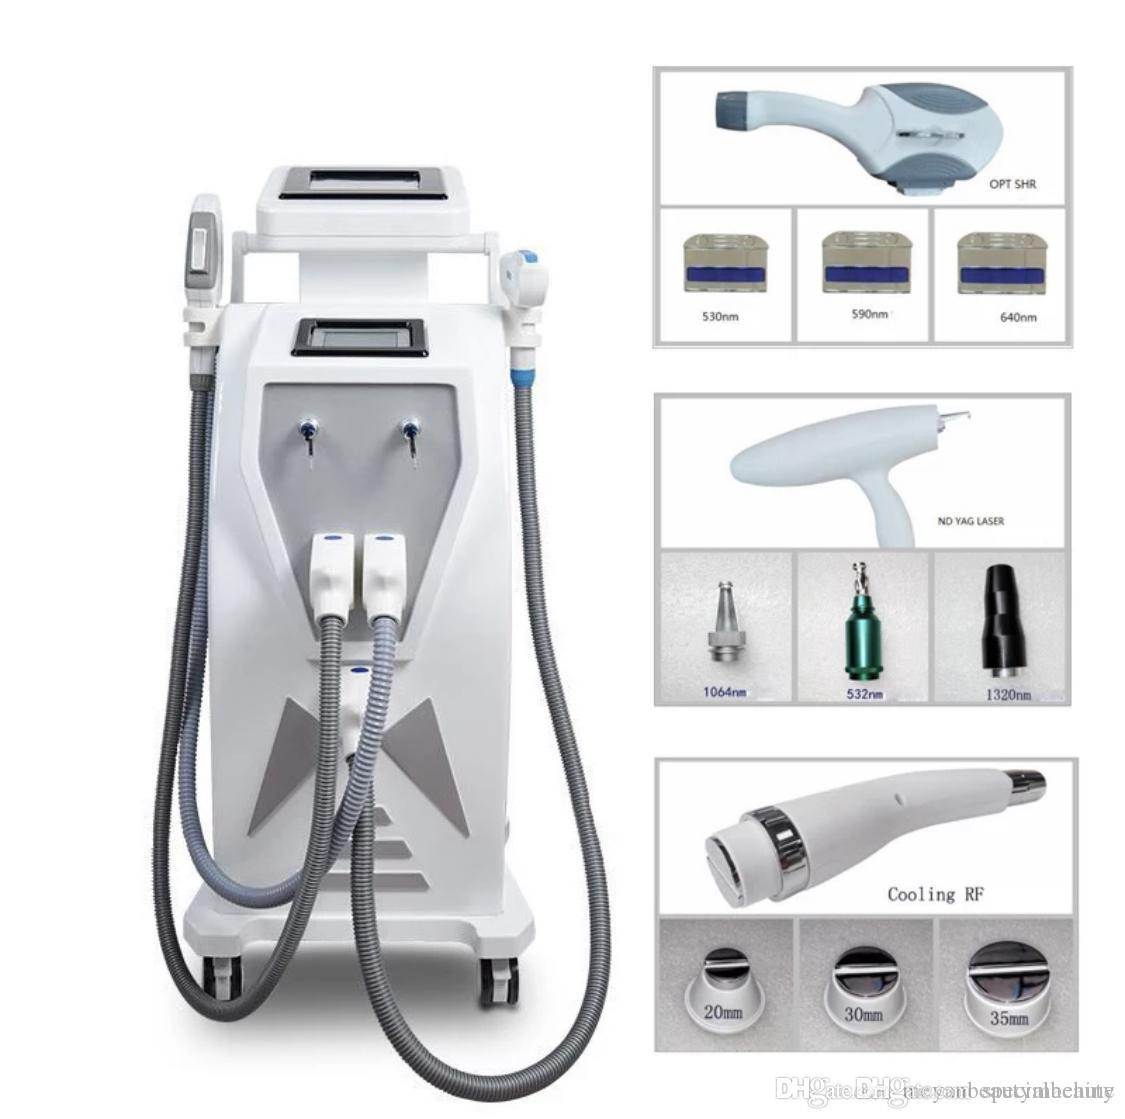 

ELIGHT 2023 OPT And Nd-YAG Tattoo Removal Laser E-Light IPL 1064nm 532nm 1320nm Carbon Peeling Freezing Hair Removal Machine Handles